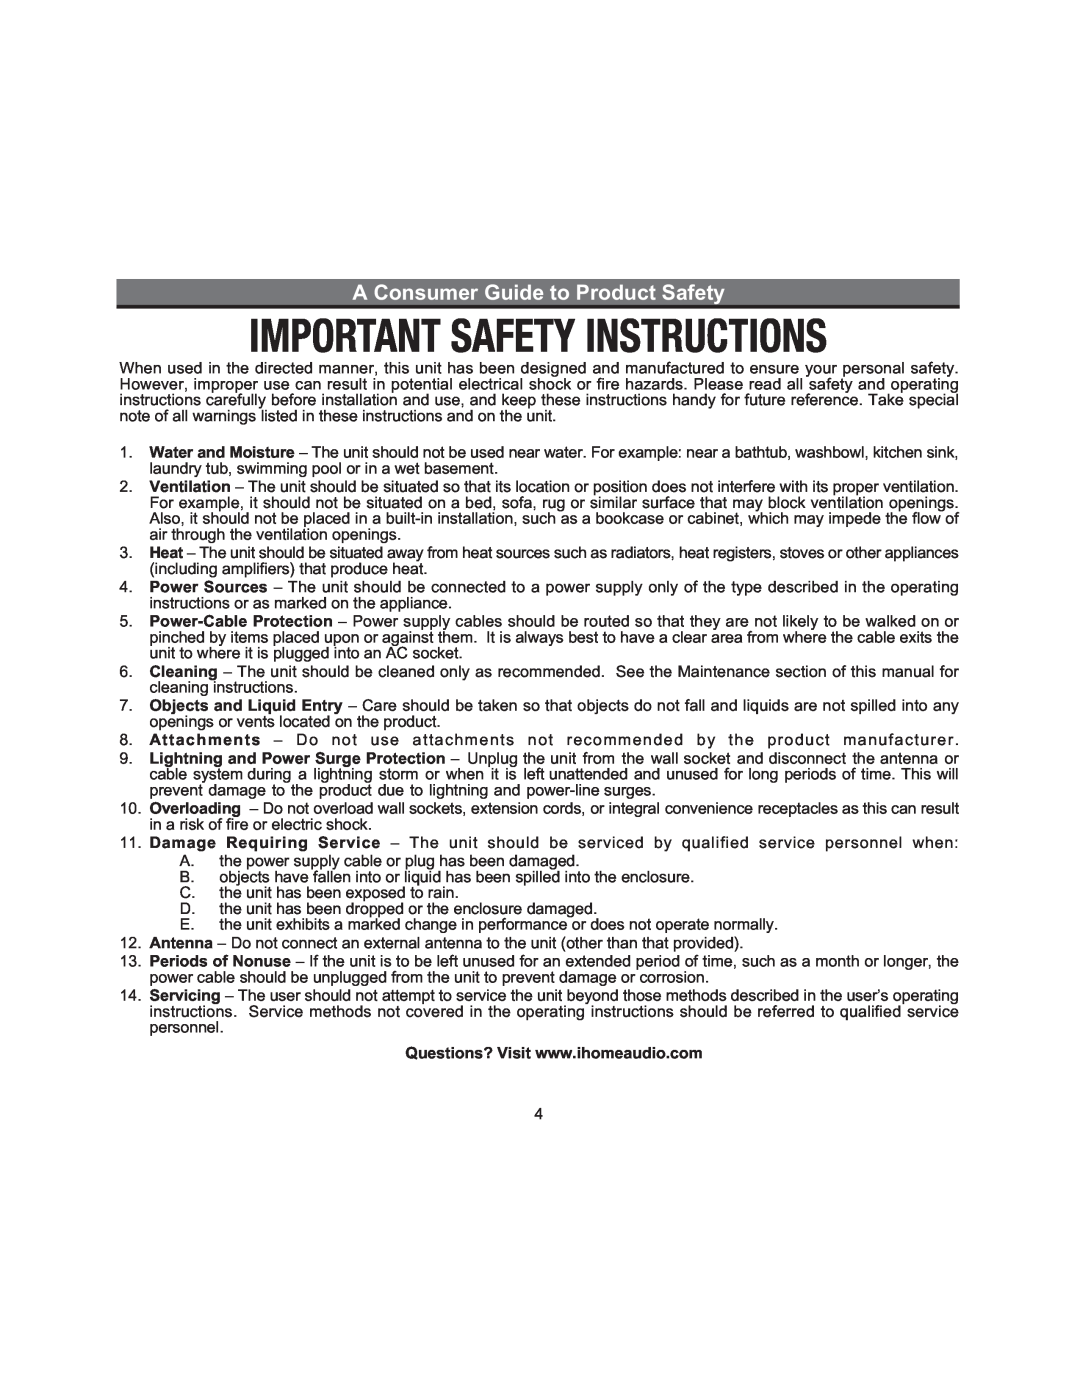 iHome ZN14 manual A Consumer Guide to Product Safety 